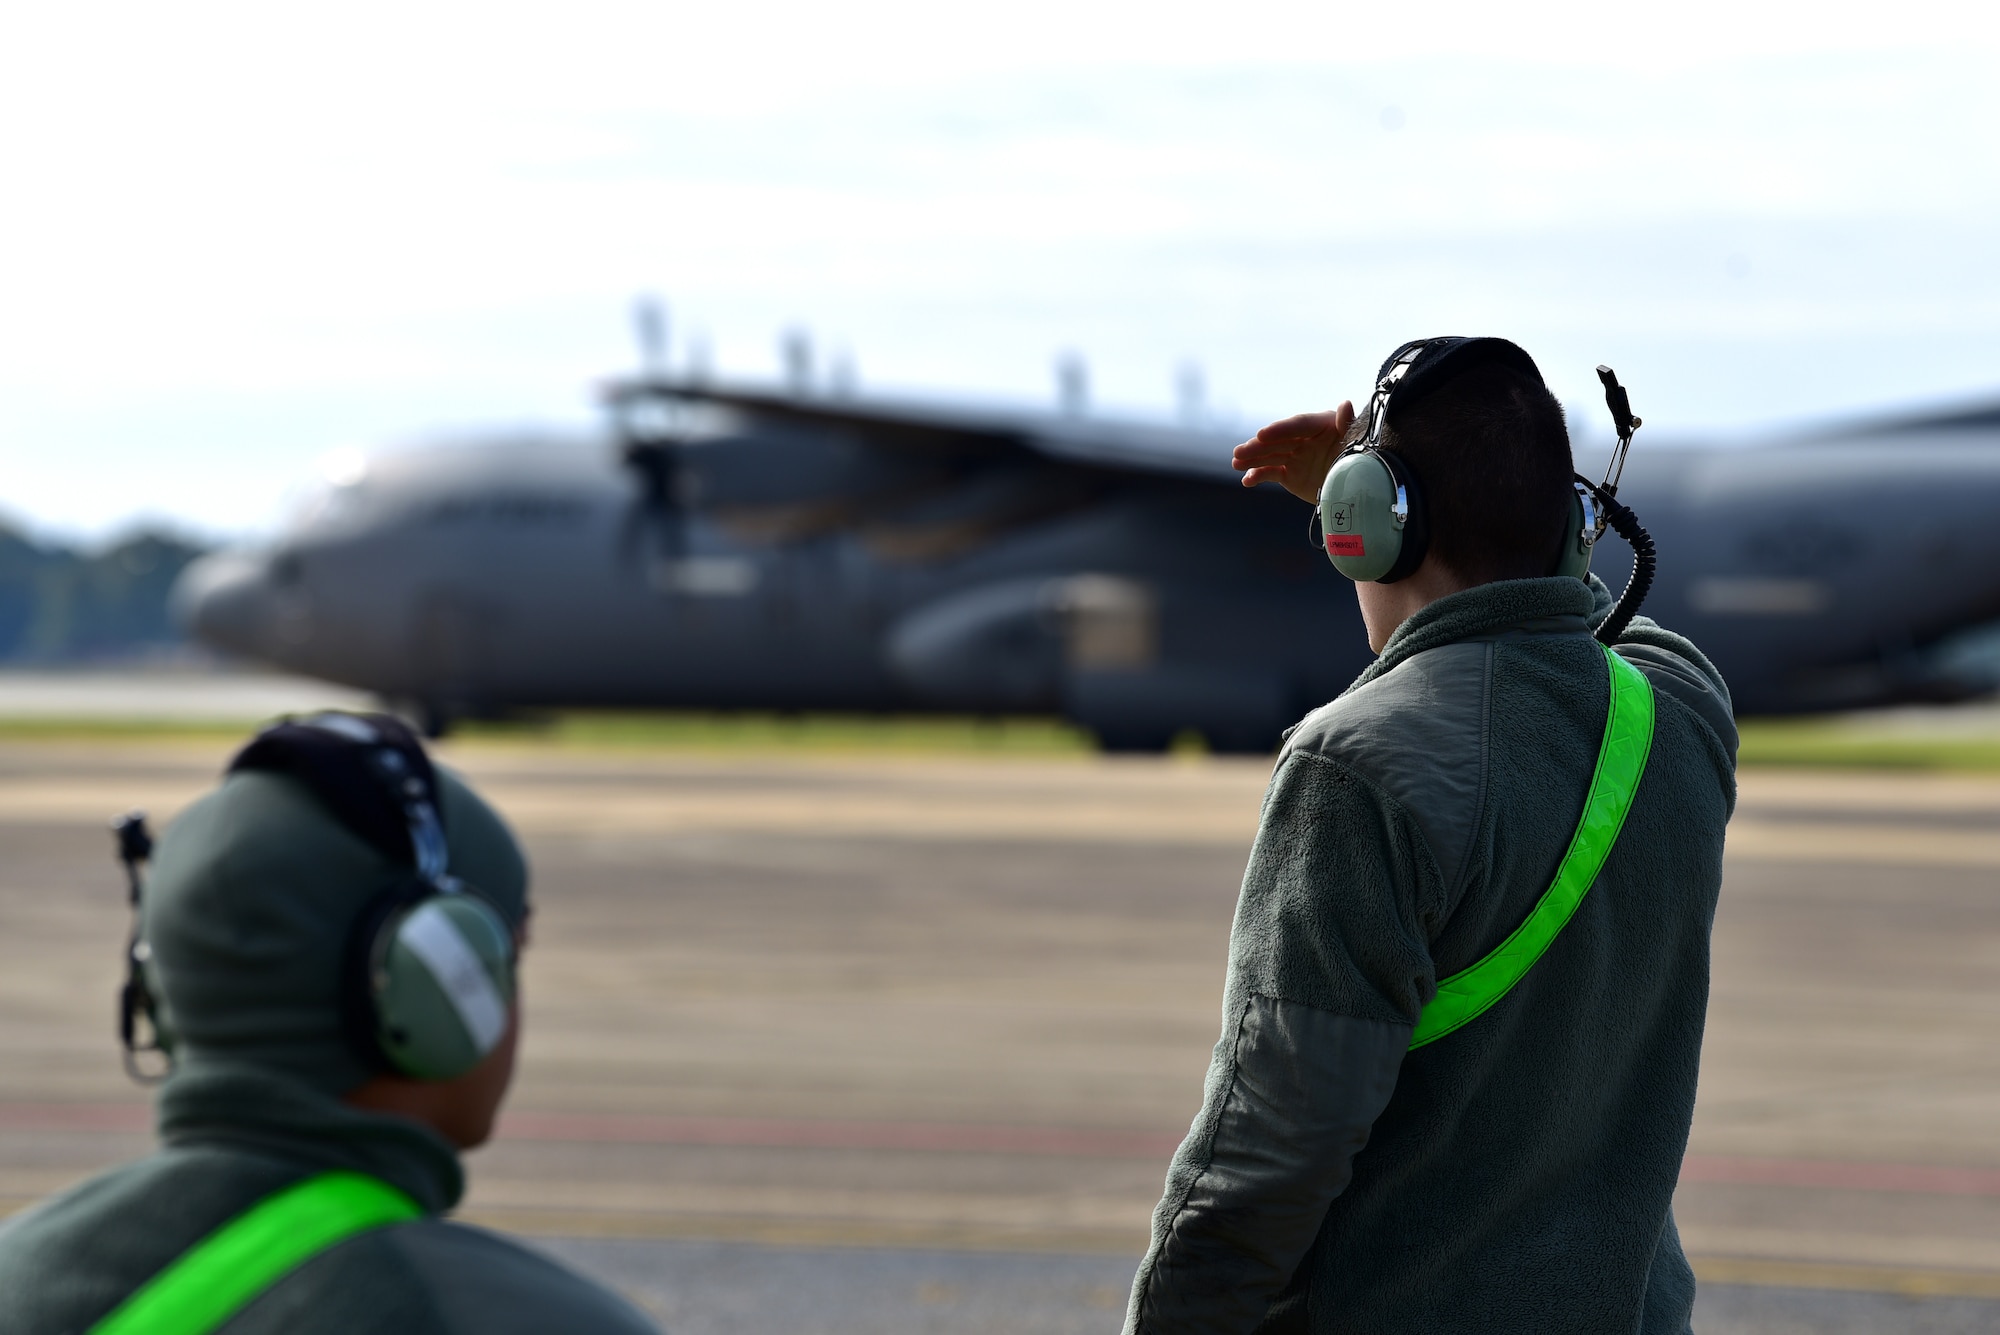 Personnel in uniform operate in and around an aircraft on an airfield